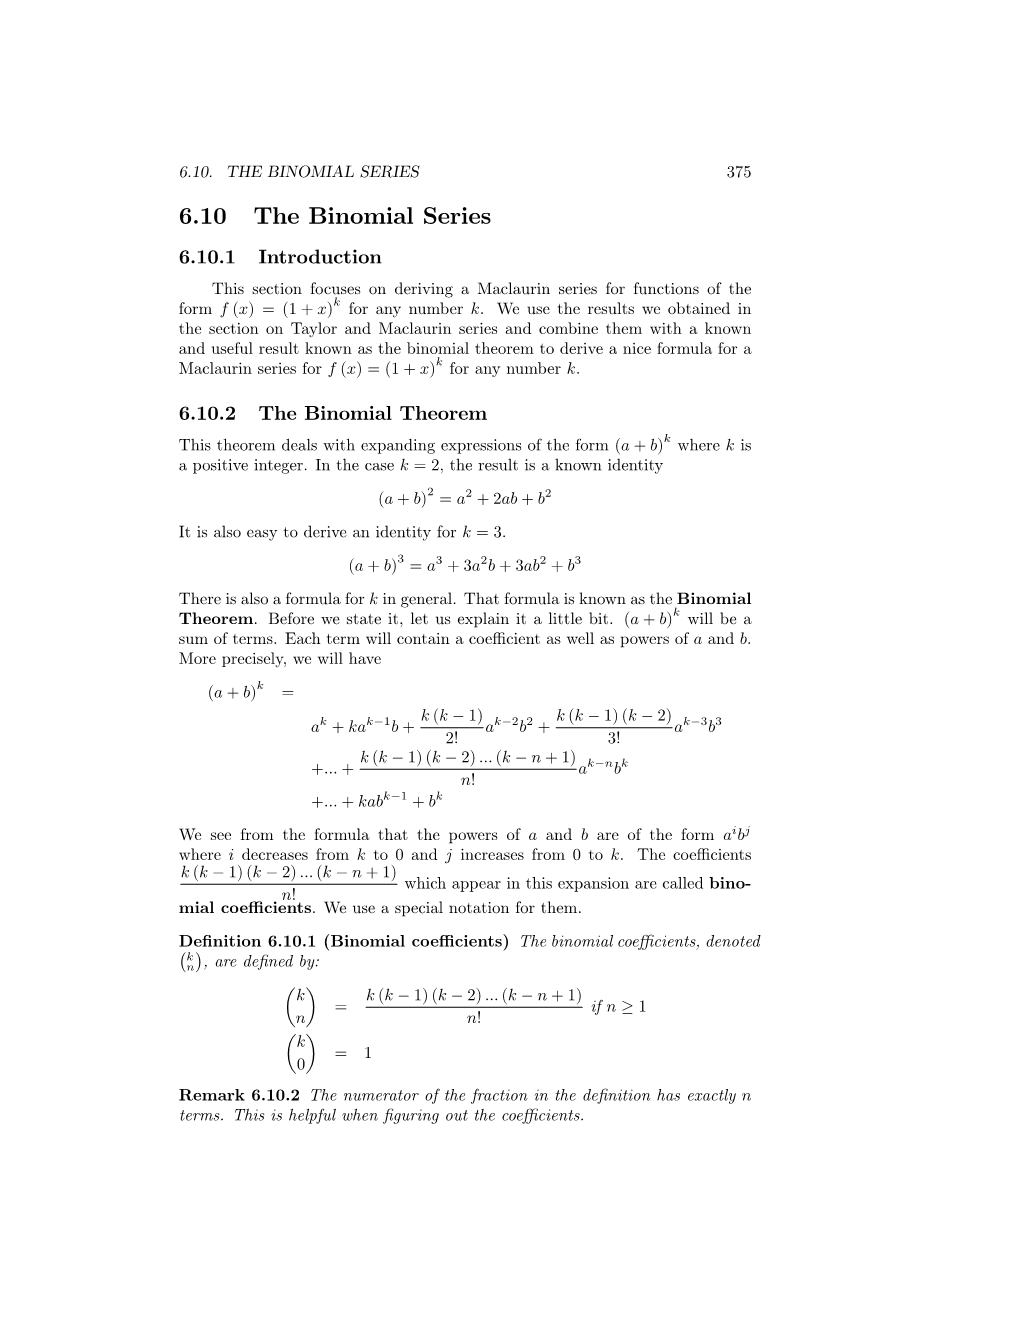 6.10 the Binomial Series 6.10.1 Introduction This Section Focuses on Deriving a Maclaurin Series for Functions of the Form F (X) = (1 + X)K for Any Number K